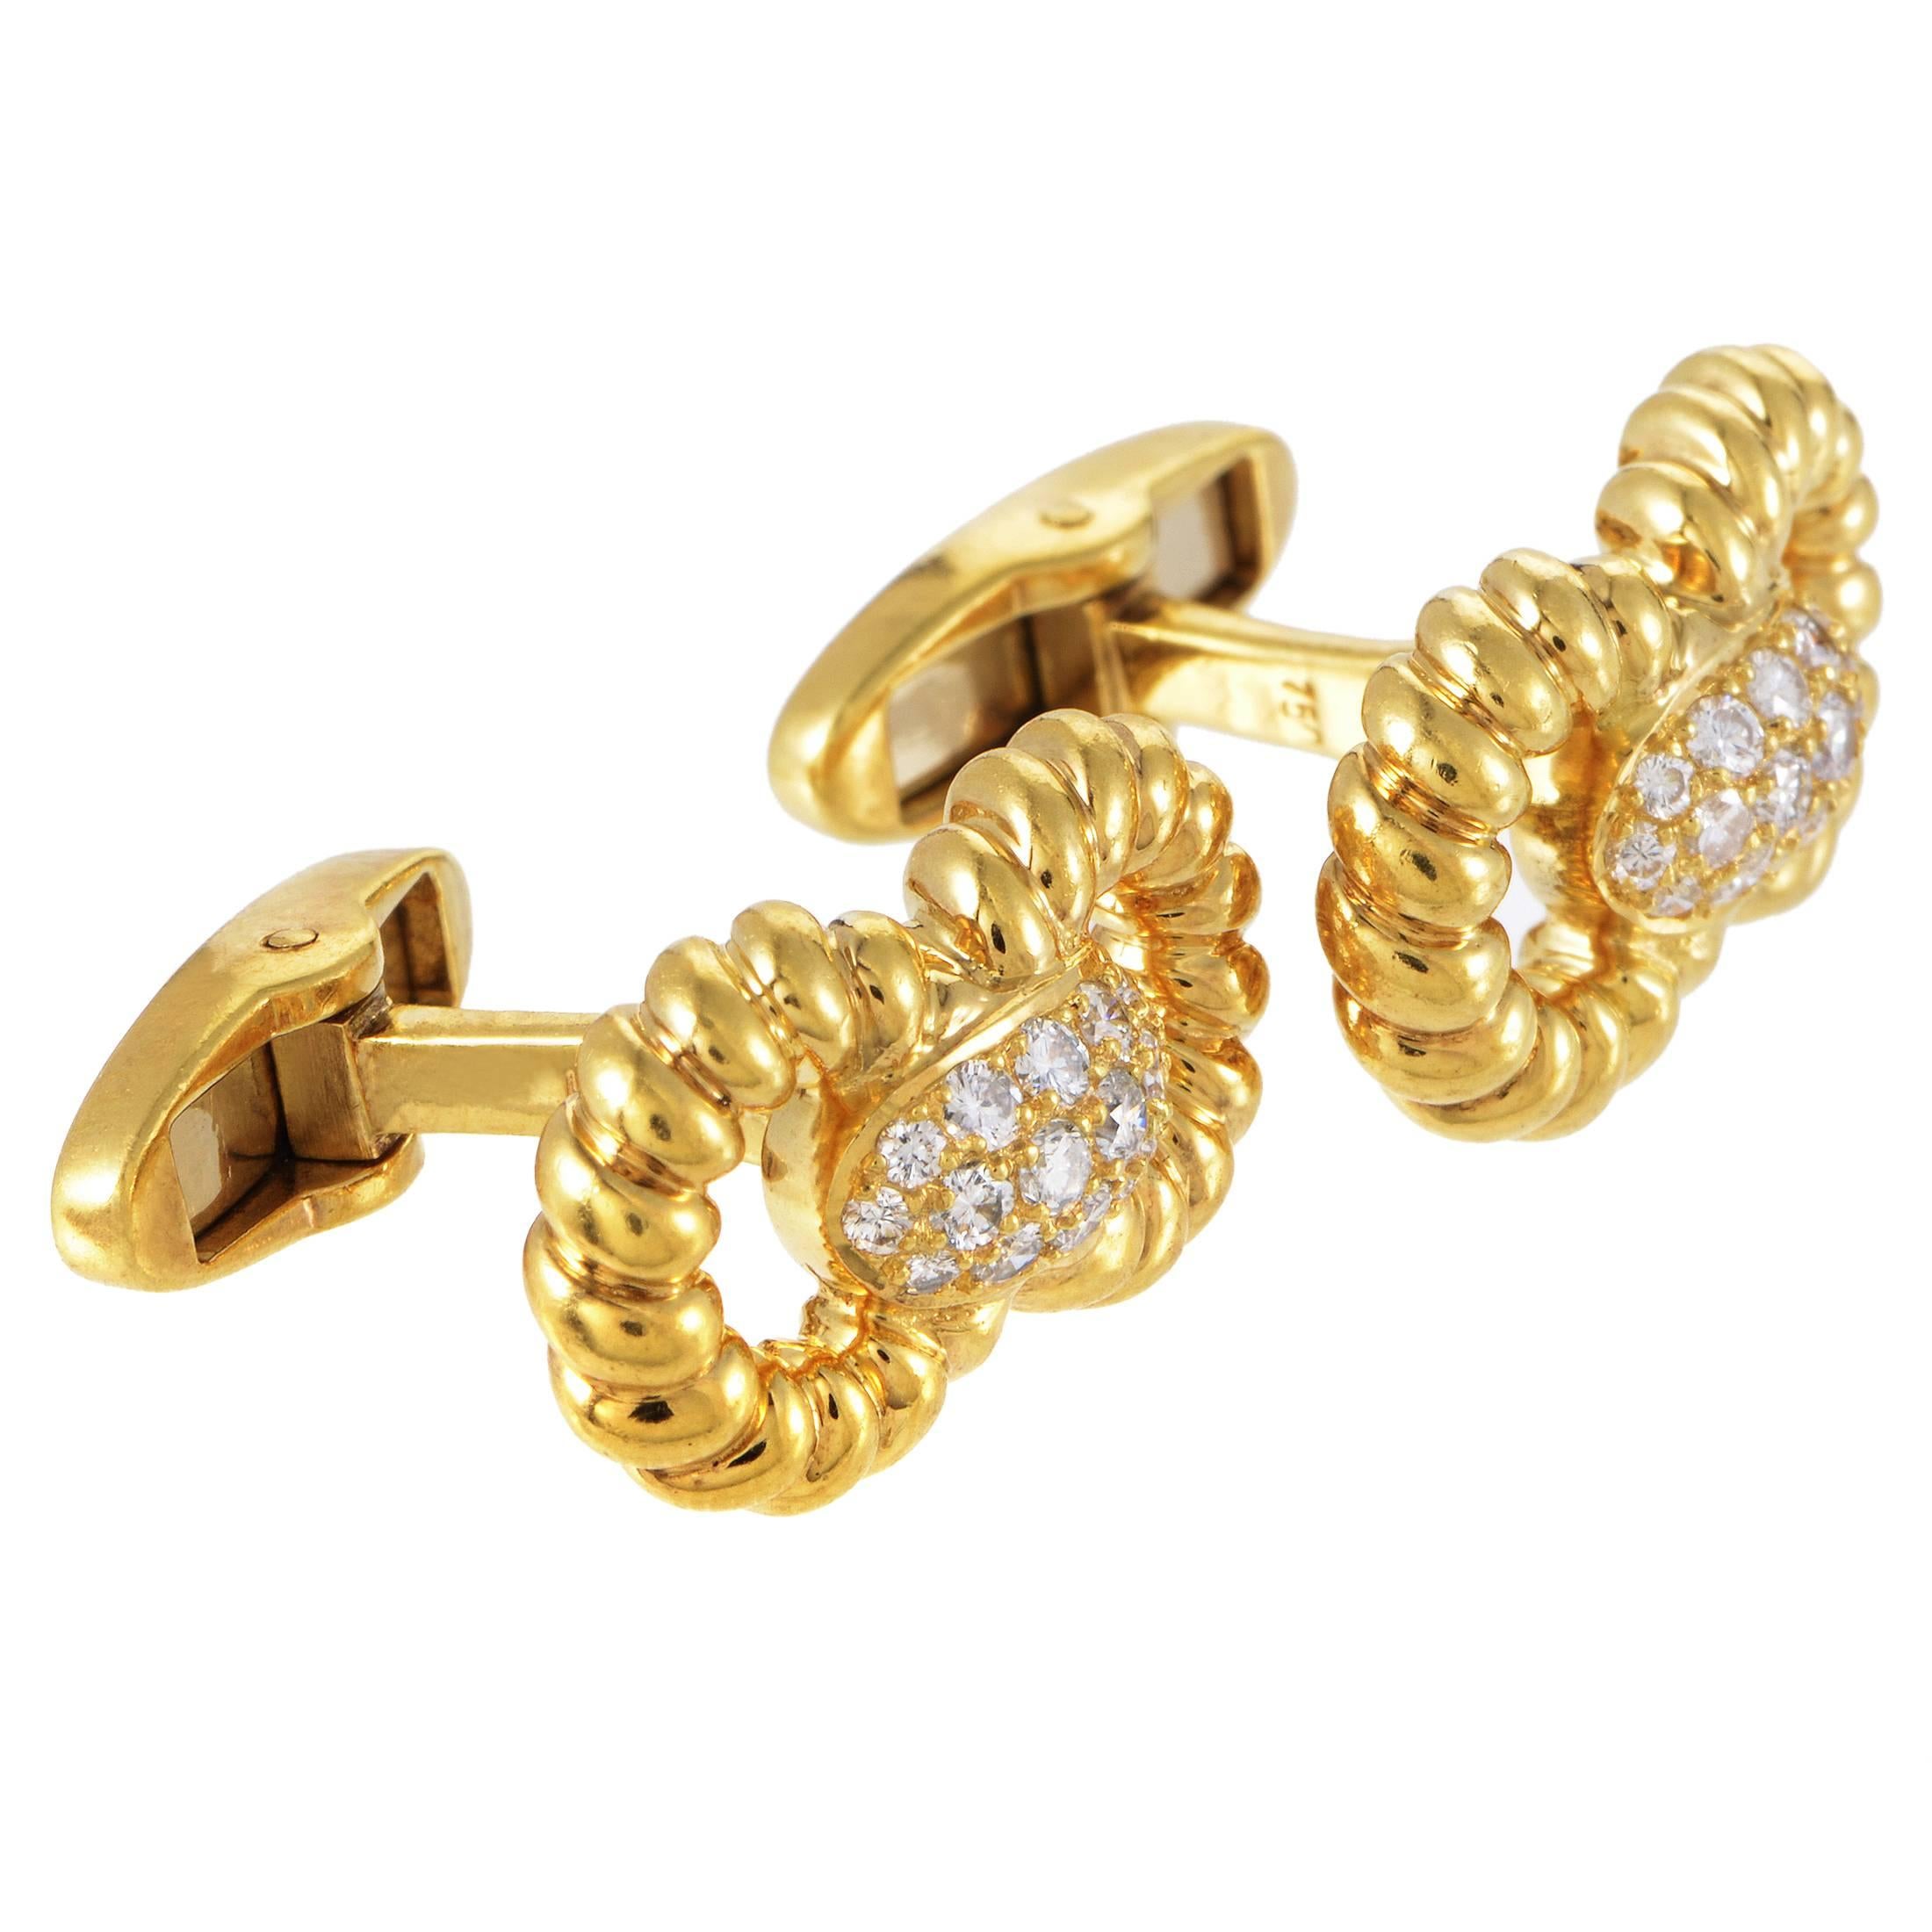 Producing an engaging aura of classic luxury by combining the fantastic 18K yellow gold and resplendent diamonds weighing in total 0.50ct, these astonishing cufflinks from Guy Laroche offer an eye-catching effect and tasteful appeal.